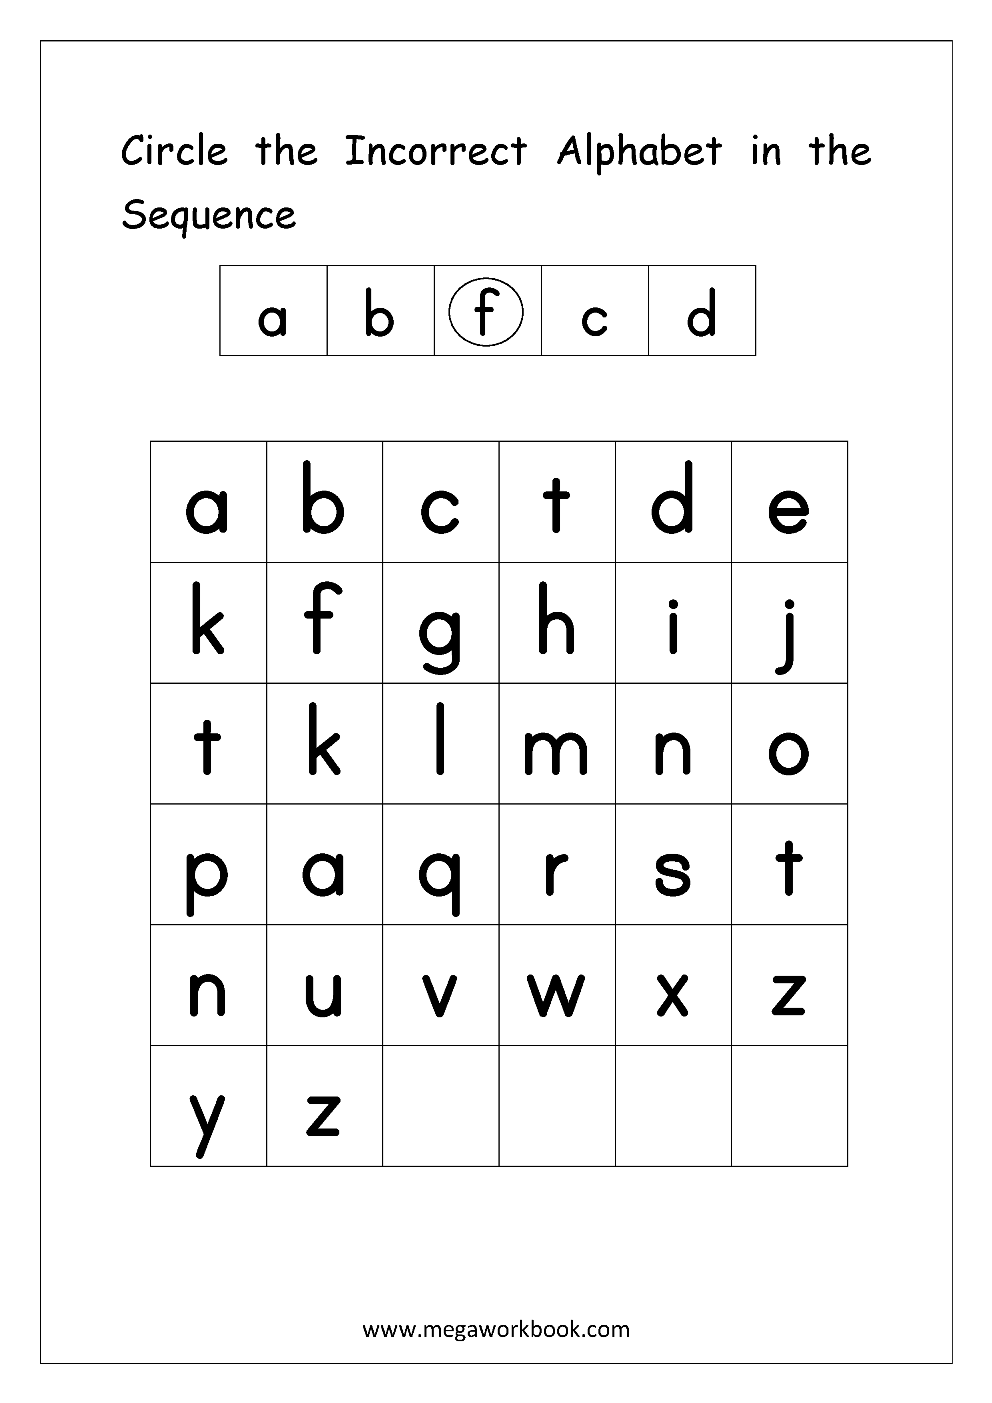 Free English Worksheets - Alphabetical Sequence inside Alphabet Sequencing Worksheets